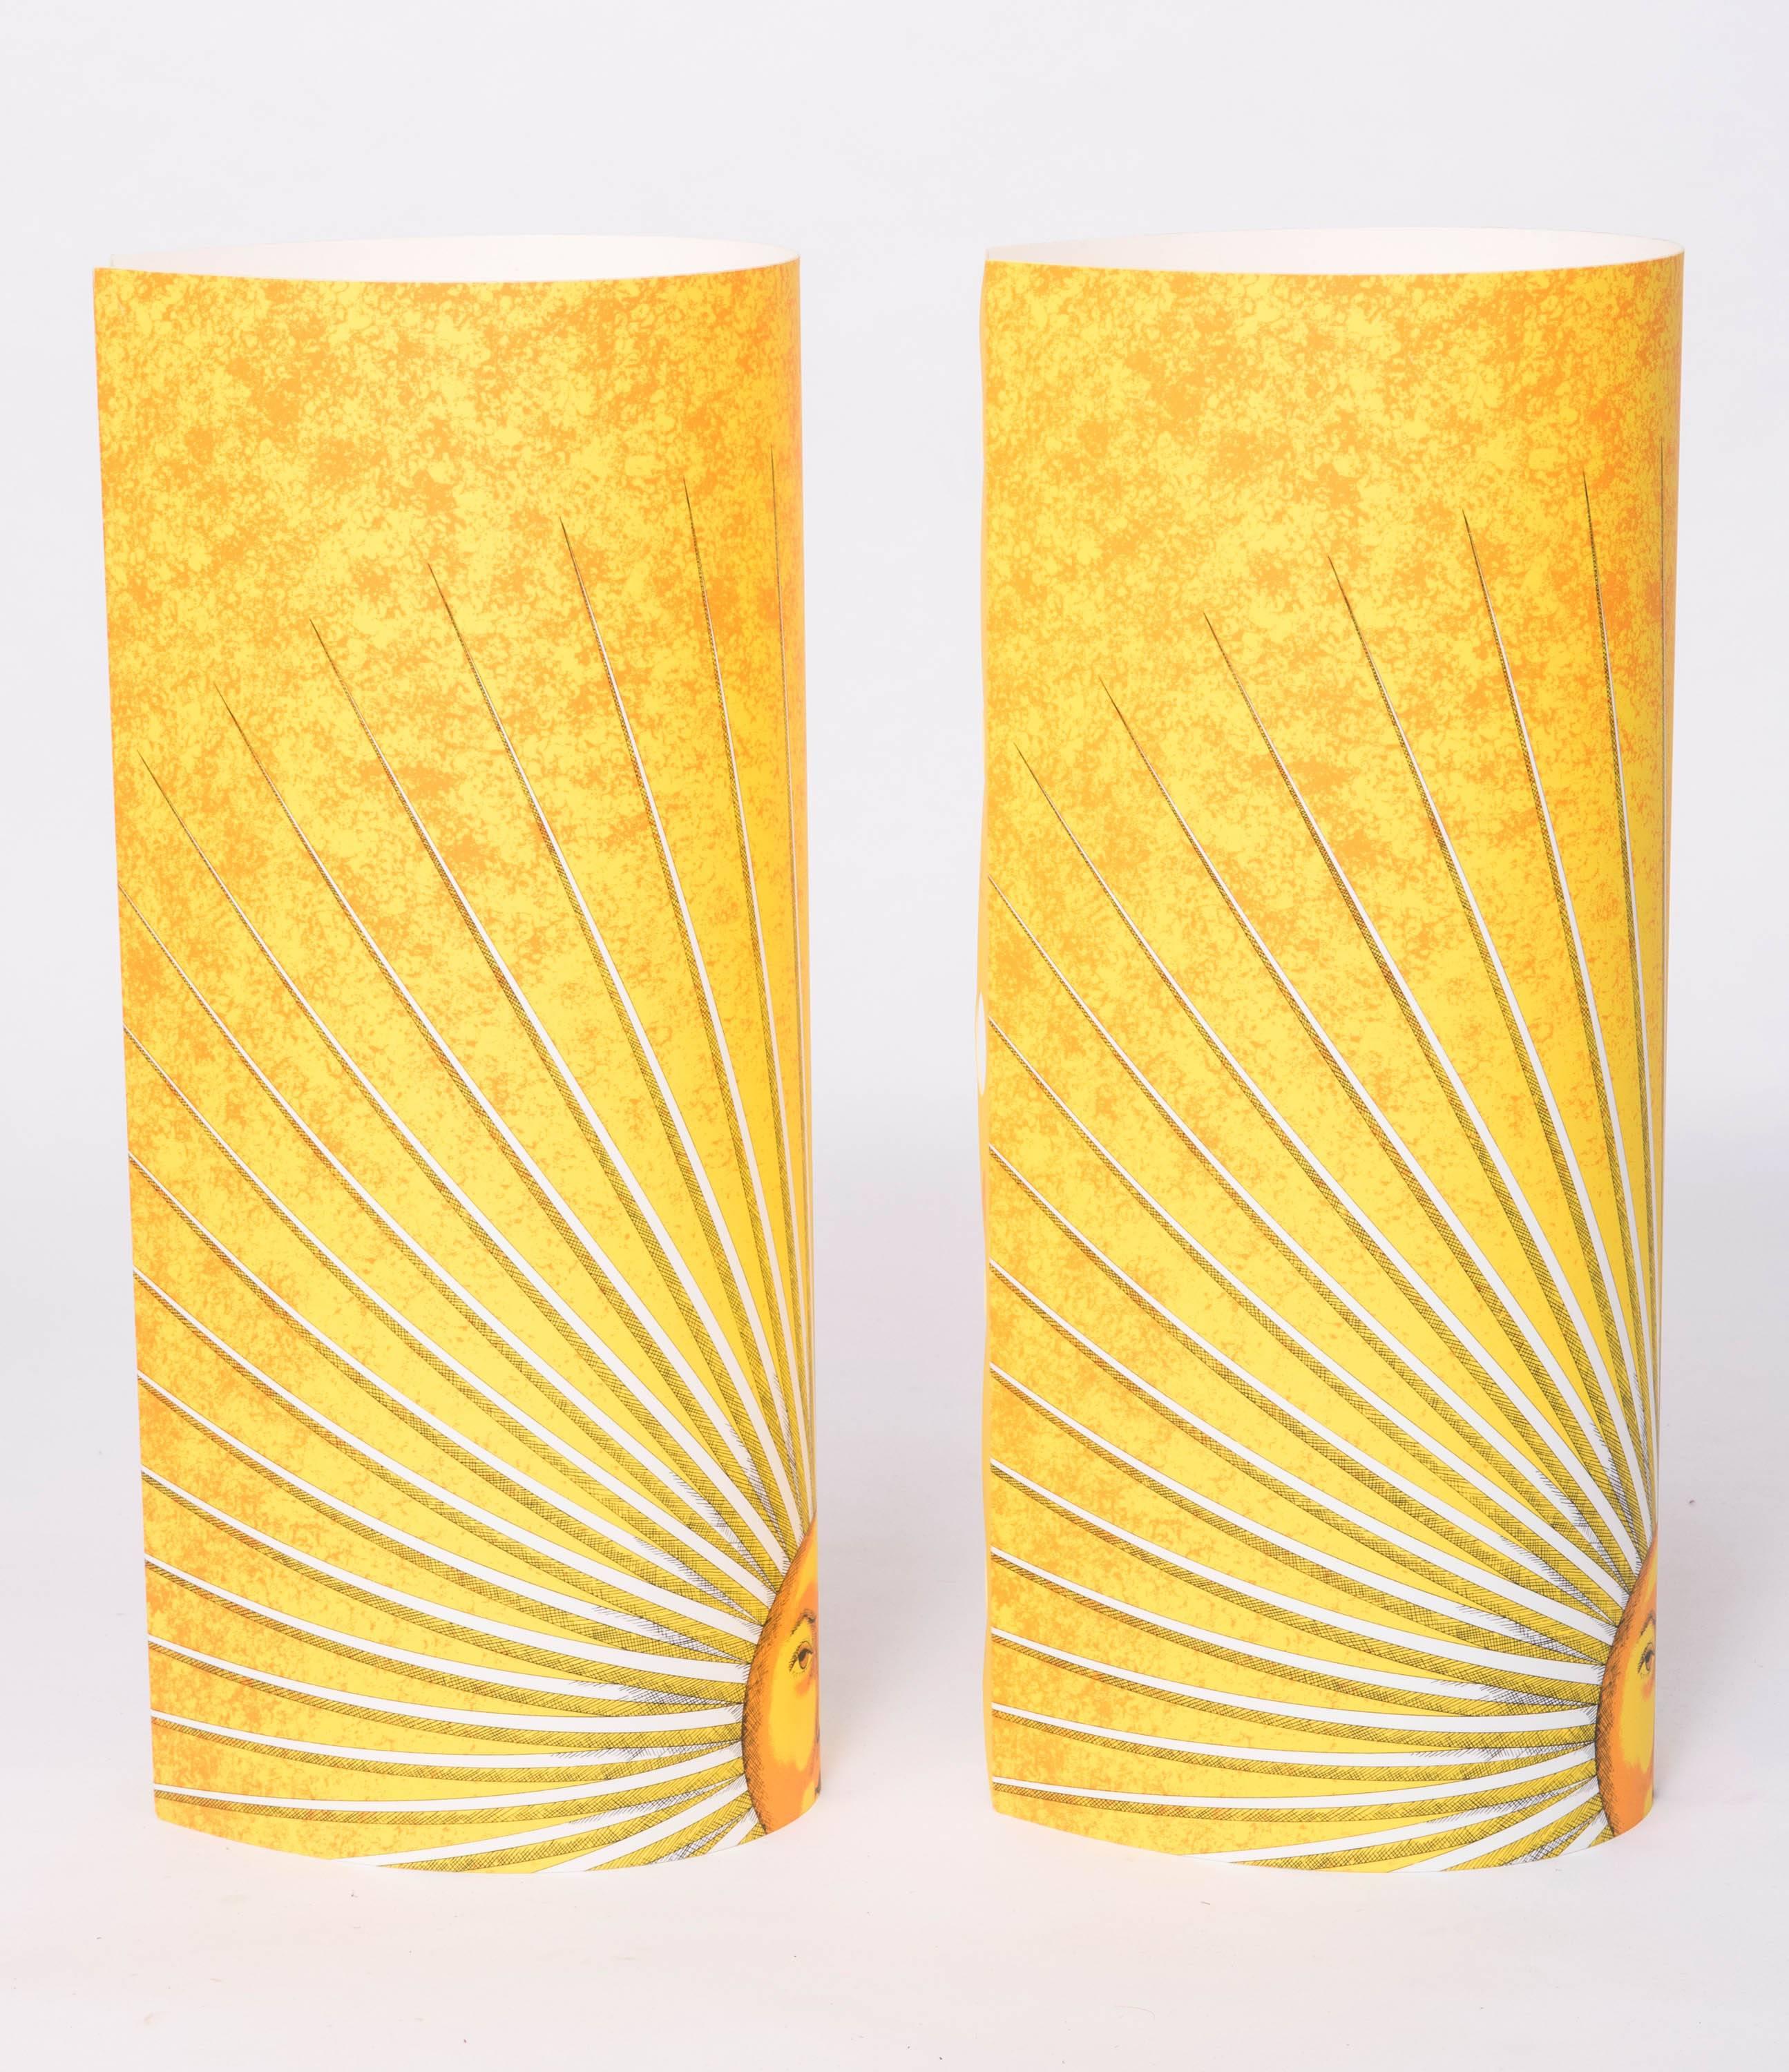 A pair of medium size table lamps by Barnaba Fornasetti
“Sole”
Printed and colored Perspex
Made by Fornasetti and Antonangeli Iluminazione. Paderno Dugano.
Italy, 1995
Measures: 60 cm high x 25 cm wide x 27 cm deep.
 